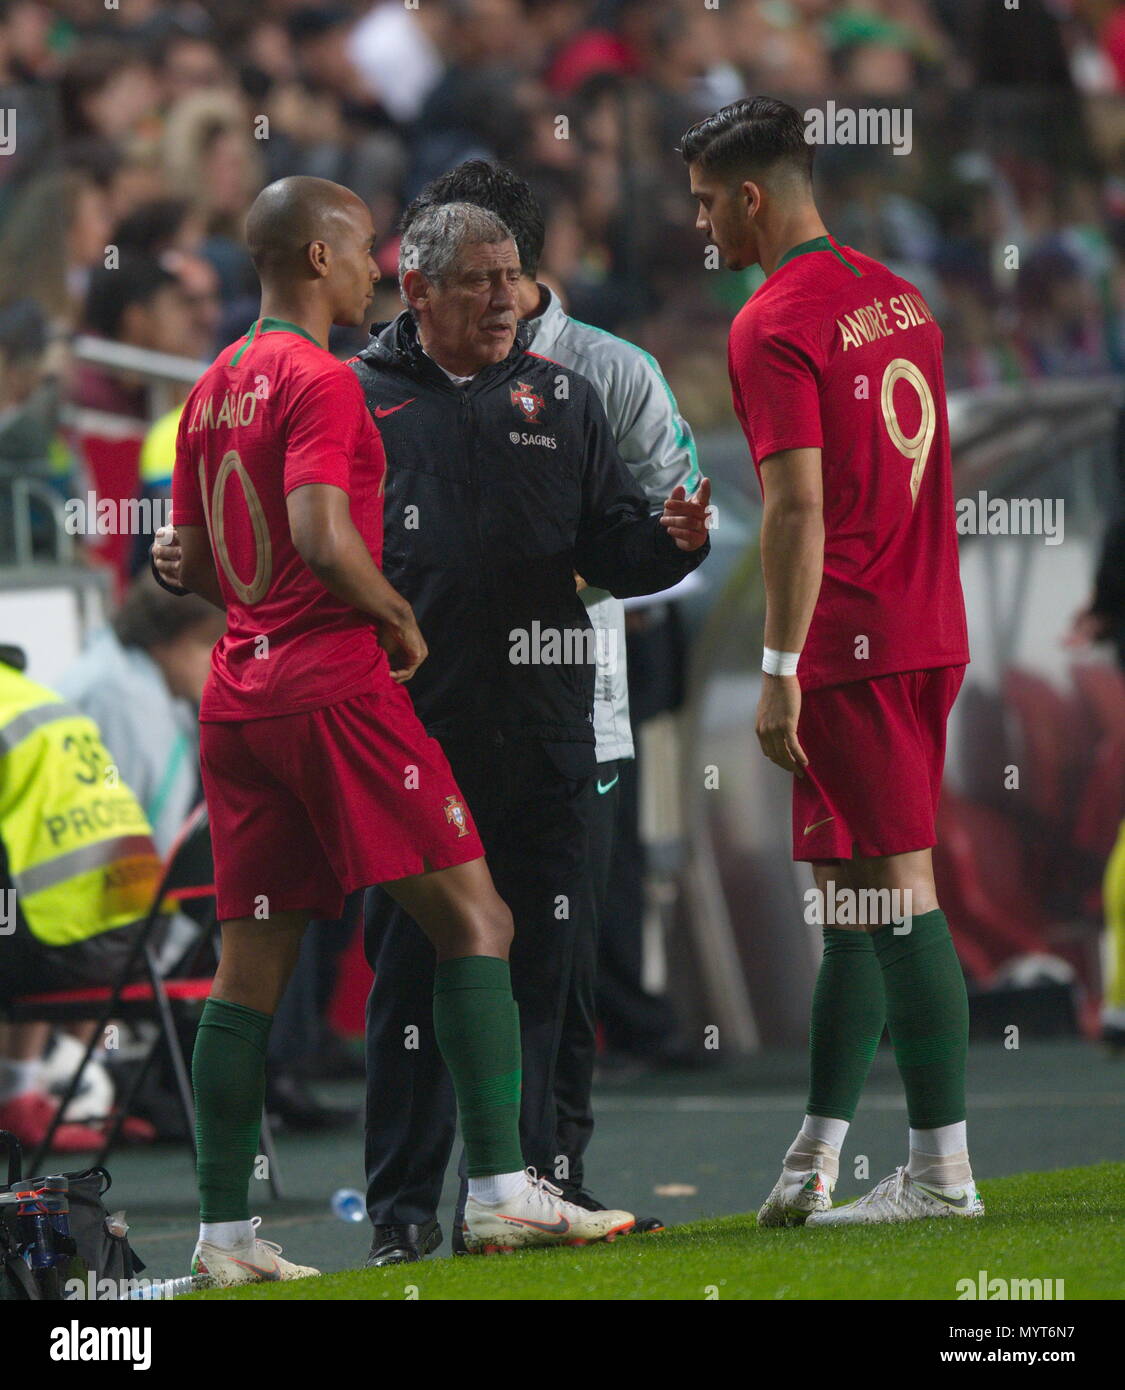 Lisbon, Portugal. 7th June, 2018. Portugal's head coach Fernando Santos (C) talks with his players Joao Mario (L) and Andre Silva during the international friendly soccer match between Portugal and Algeria at Luz Stadium in Lisbon, Portugal, on June 7, 2018. Portugal won 3-0. Credit: Zhang Liyun/Xinhua/Alamy Live News Stock Photo